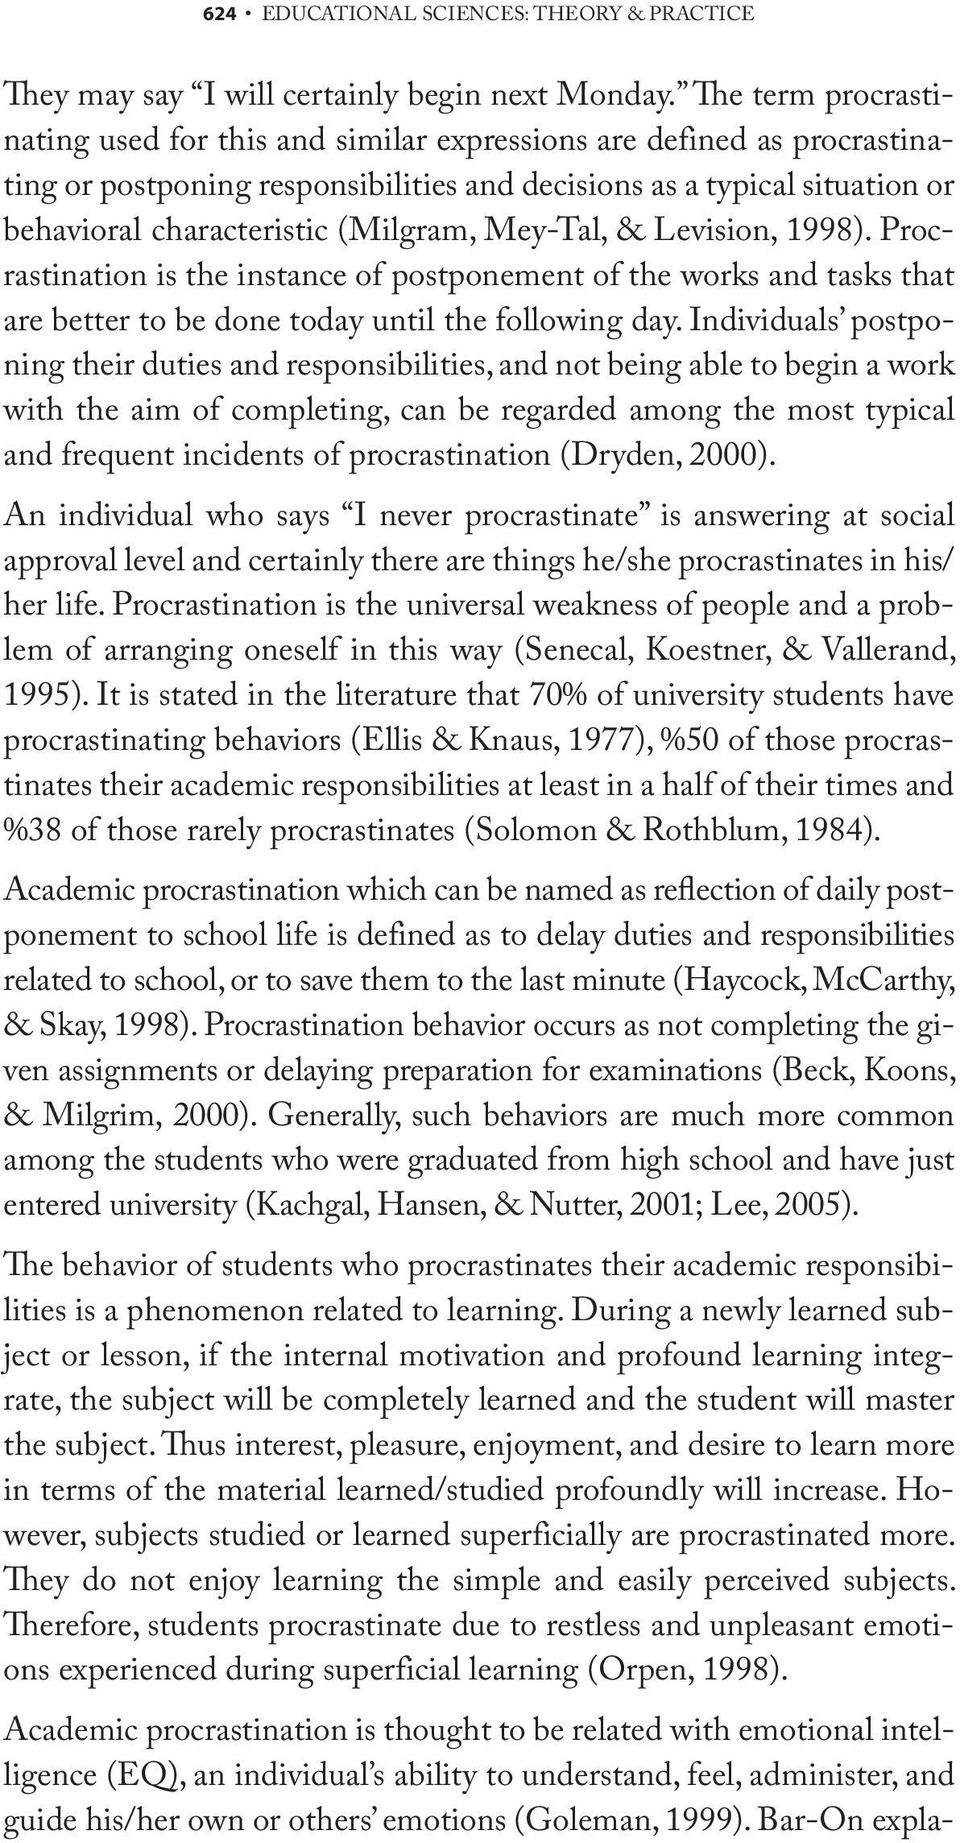 (Milgram, Mey-Tal, & Levision, 1998). Procrastination is the instance of postponement of the works and tasks that are better to be done today until the following day.